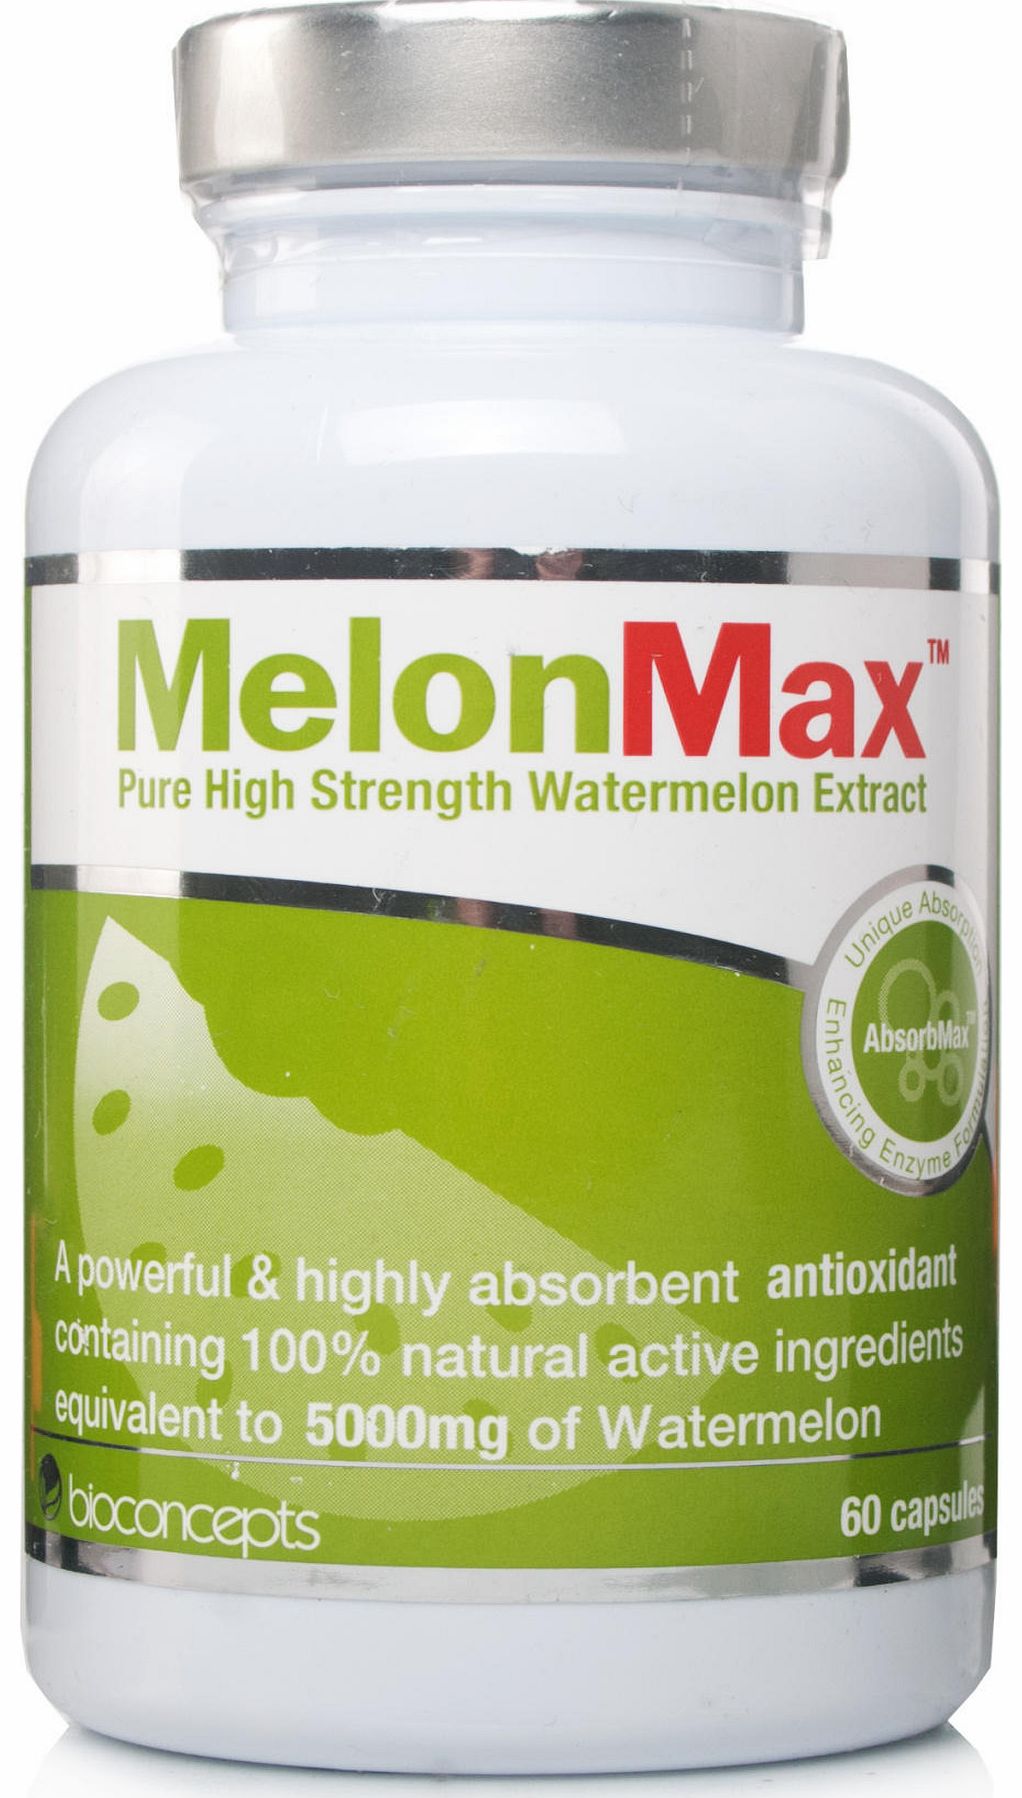 Bioconcepts MelonMax Pure High Strength Watermelon Extract